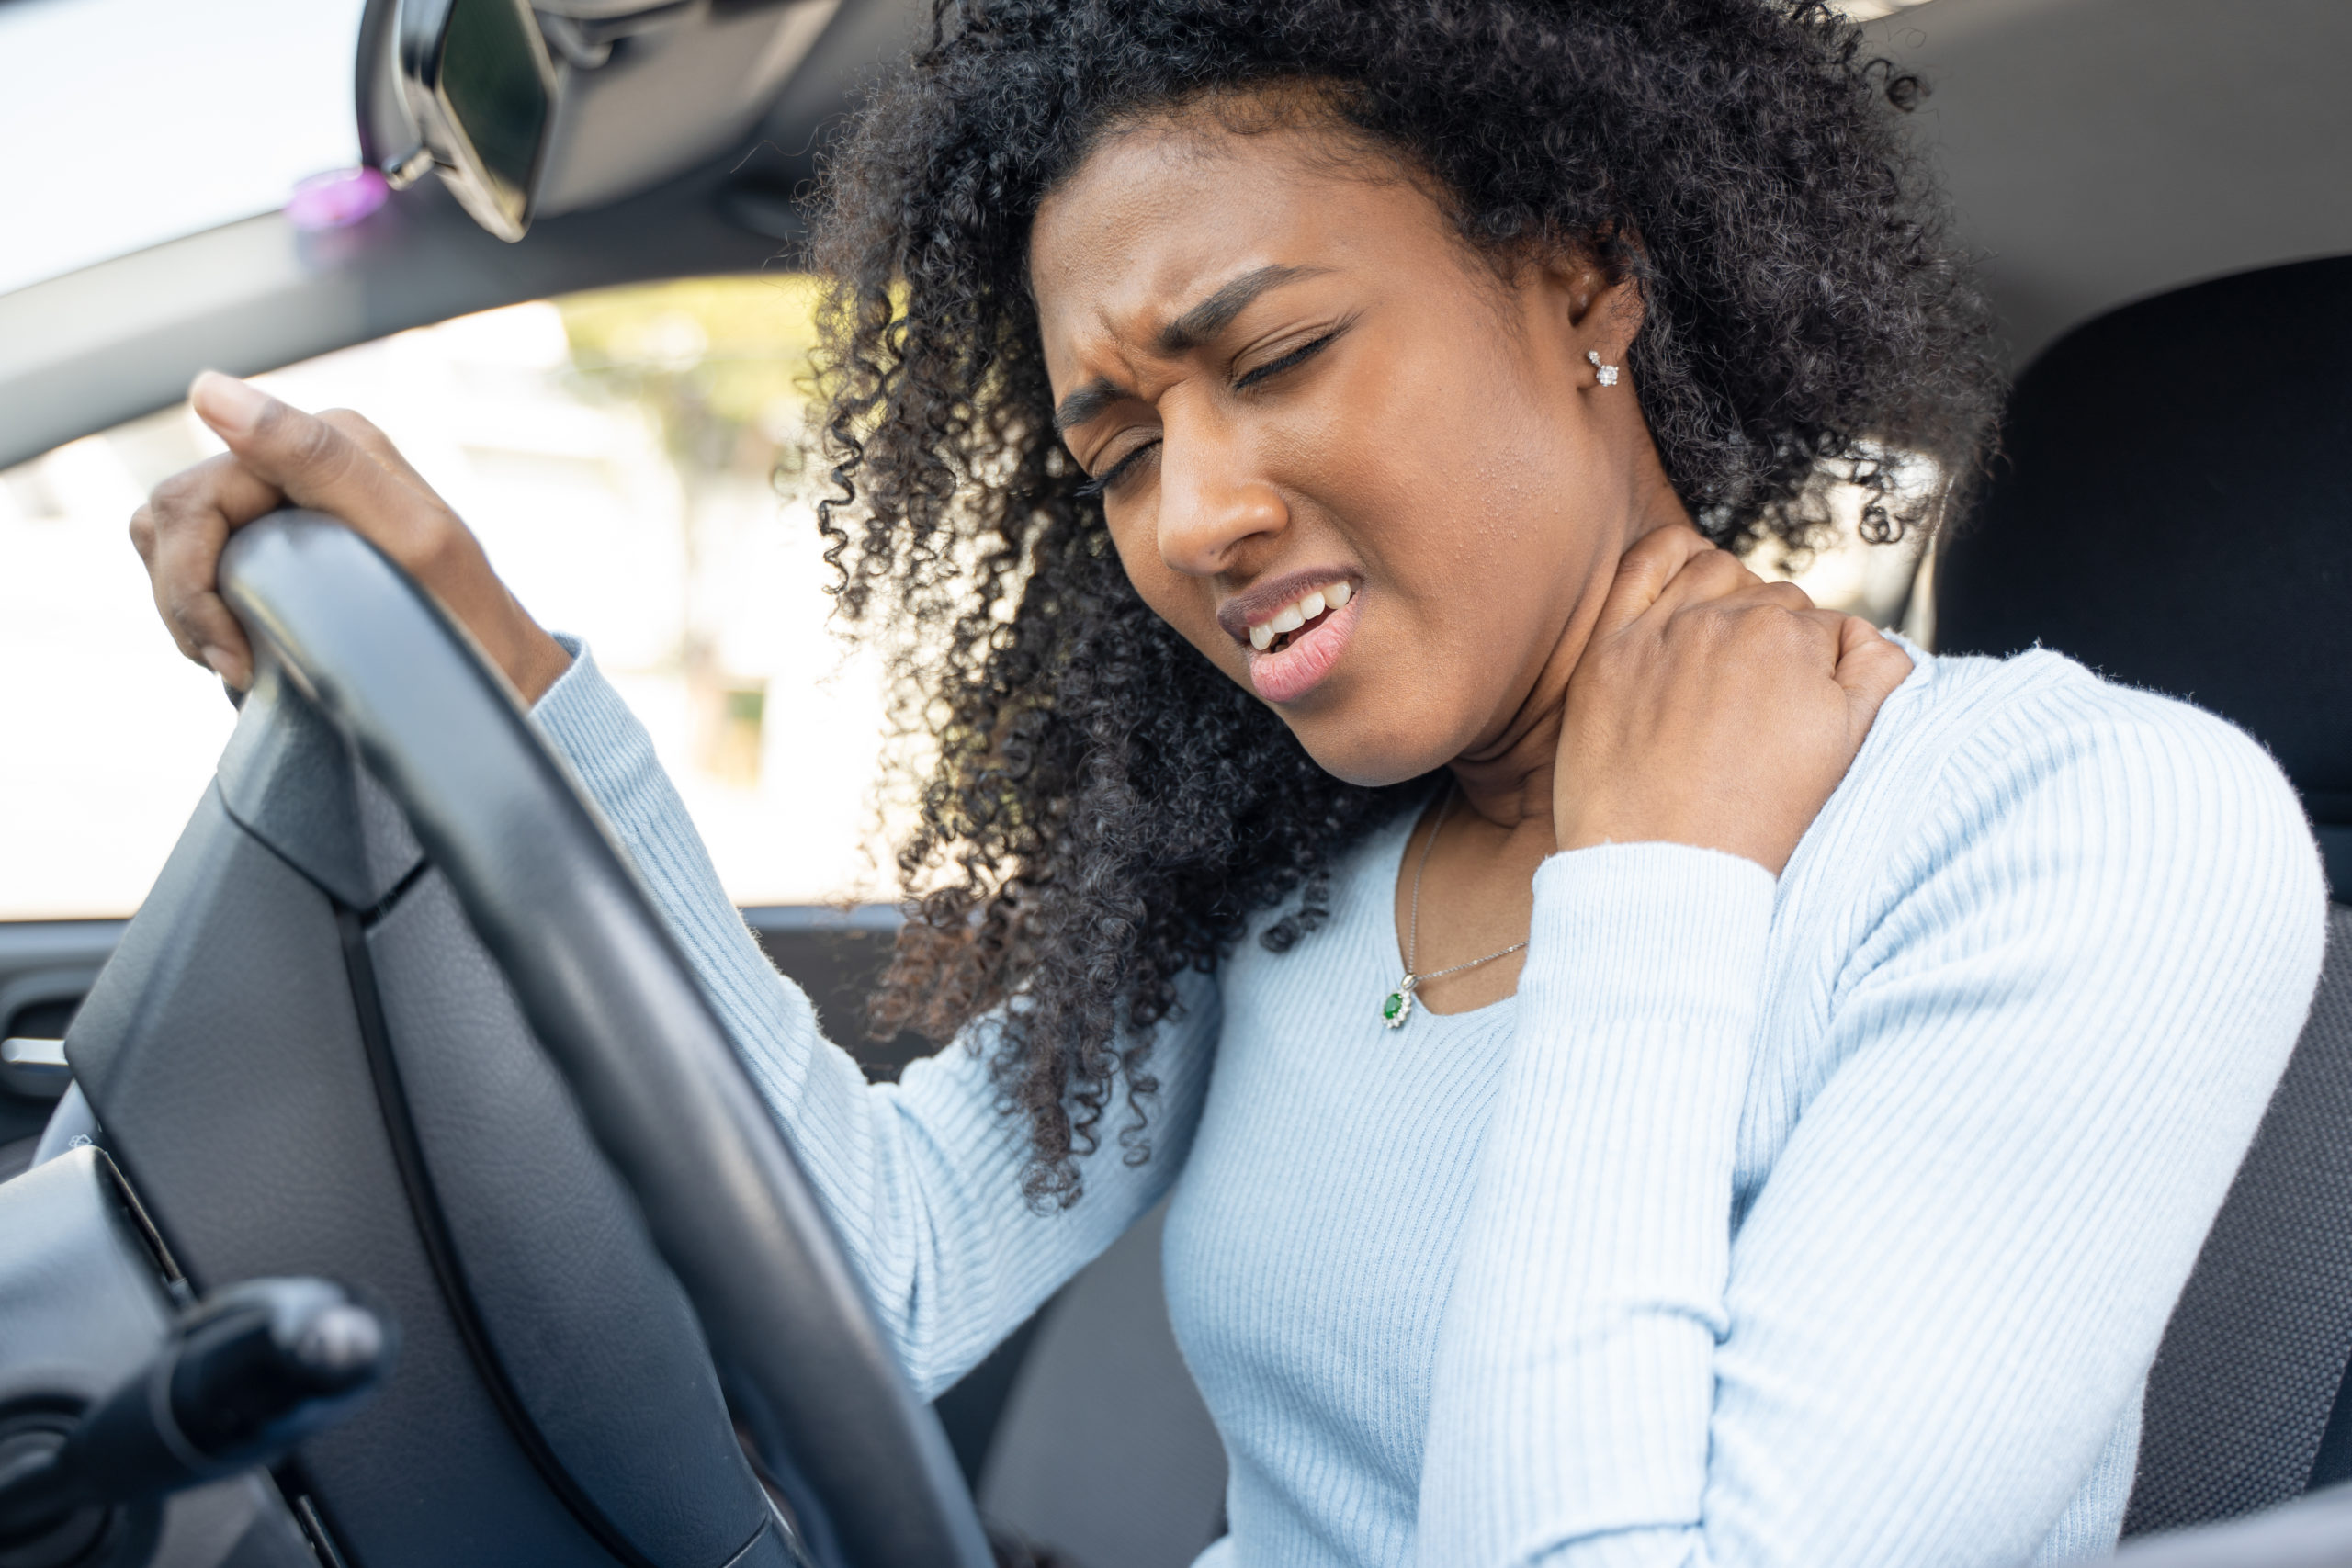 Car Accident Injuries and How to Avoid Them